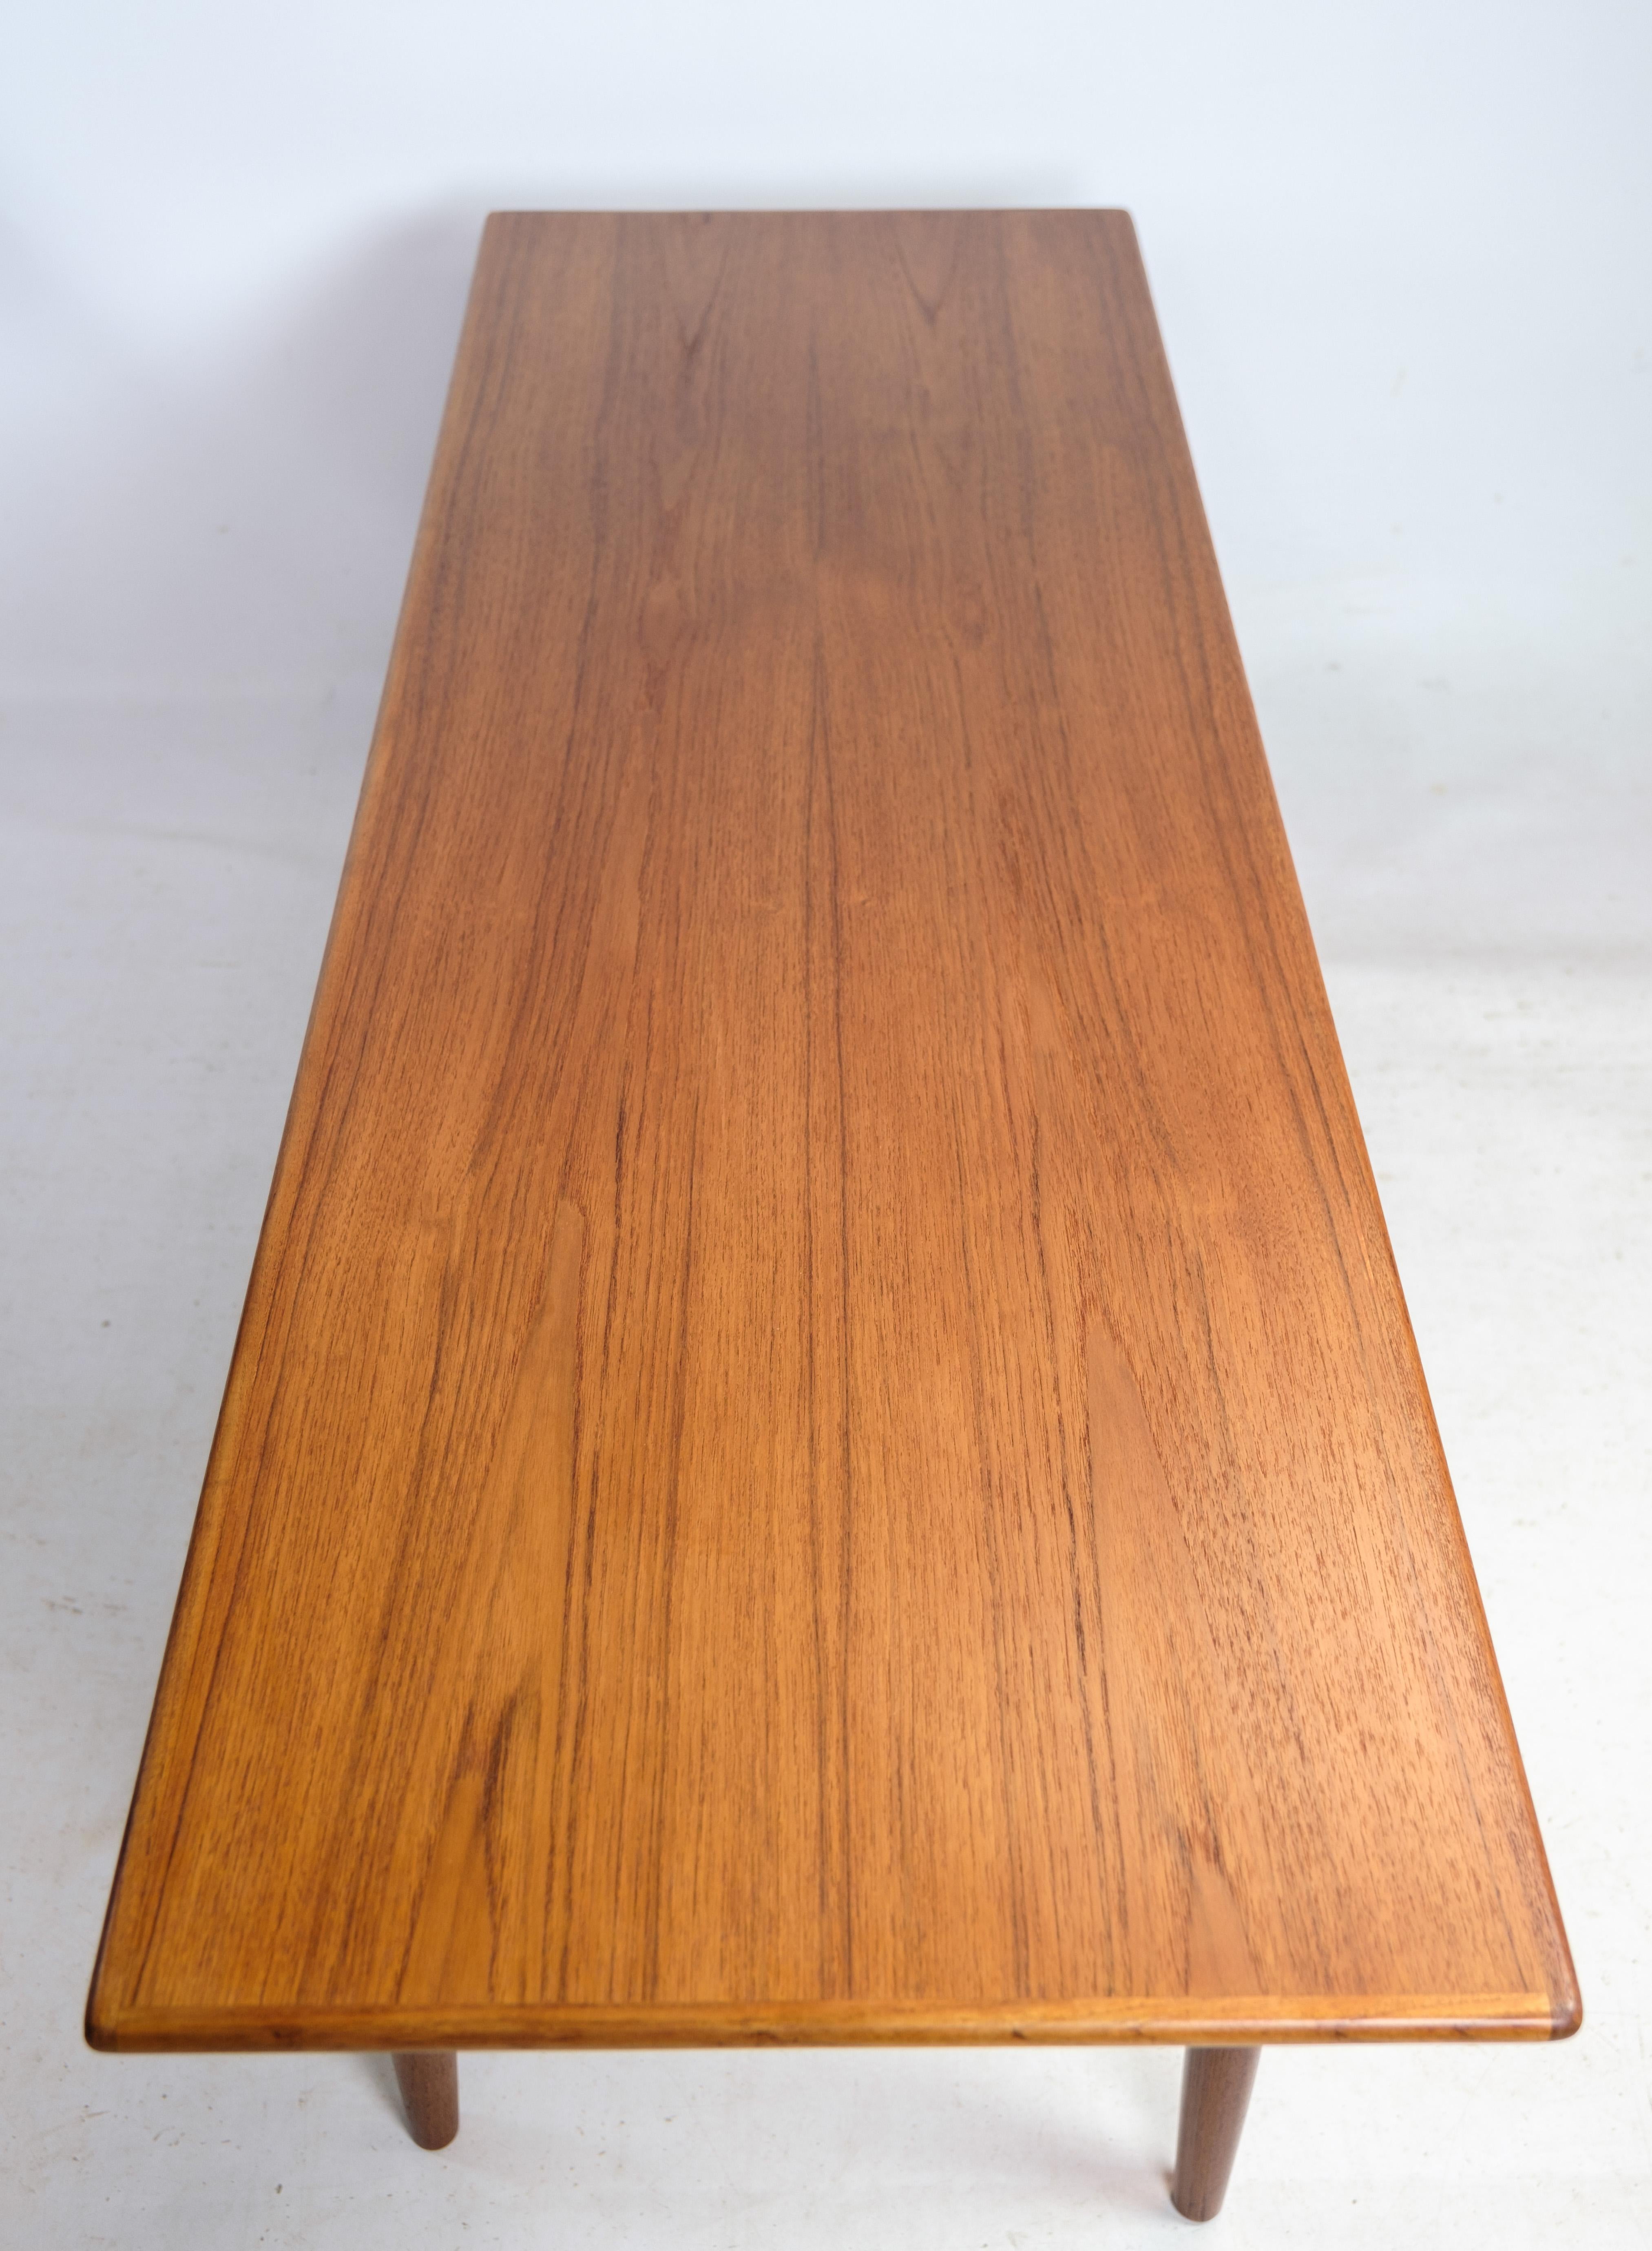 Coffee Table in Teak and Paper Cord Shelf of Danish Design from the 1960s For Sale 7